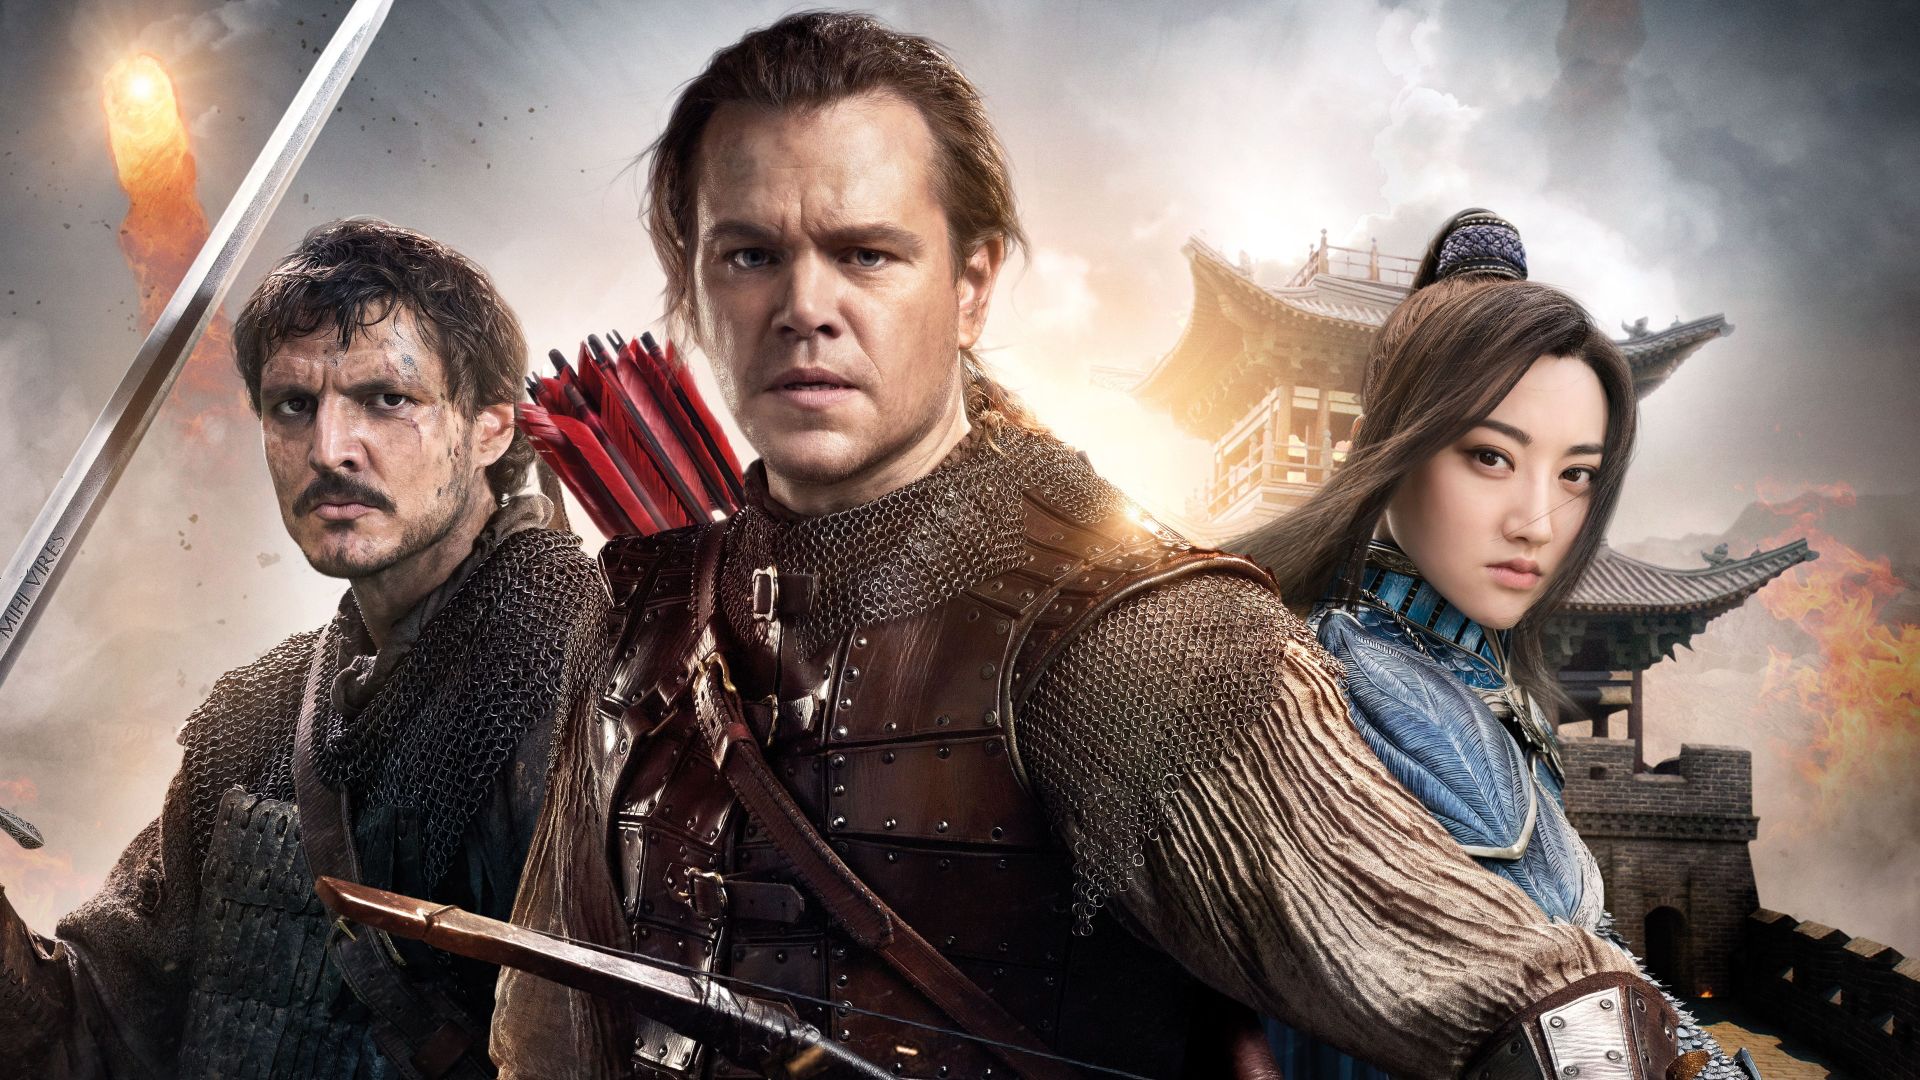 Wallpaper The great wall 2016 movie